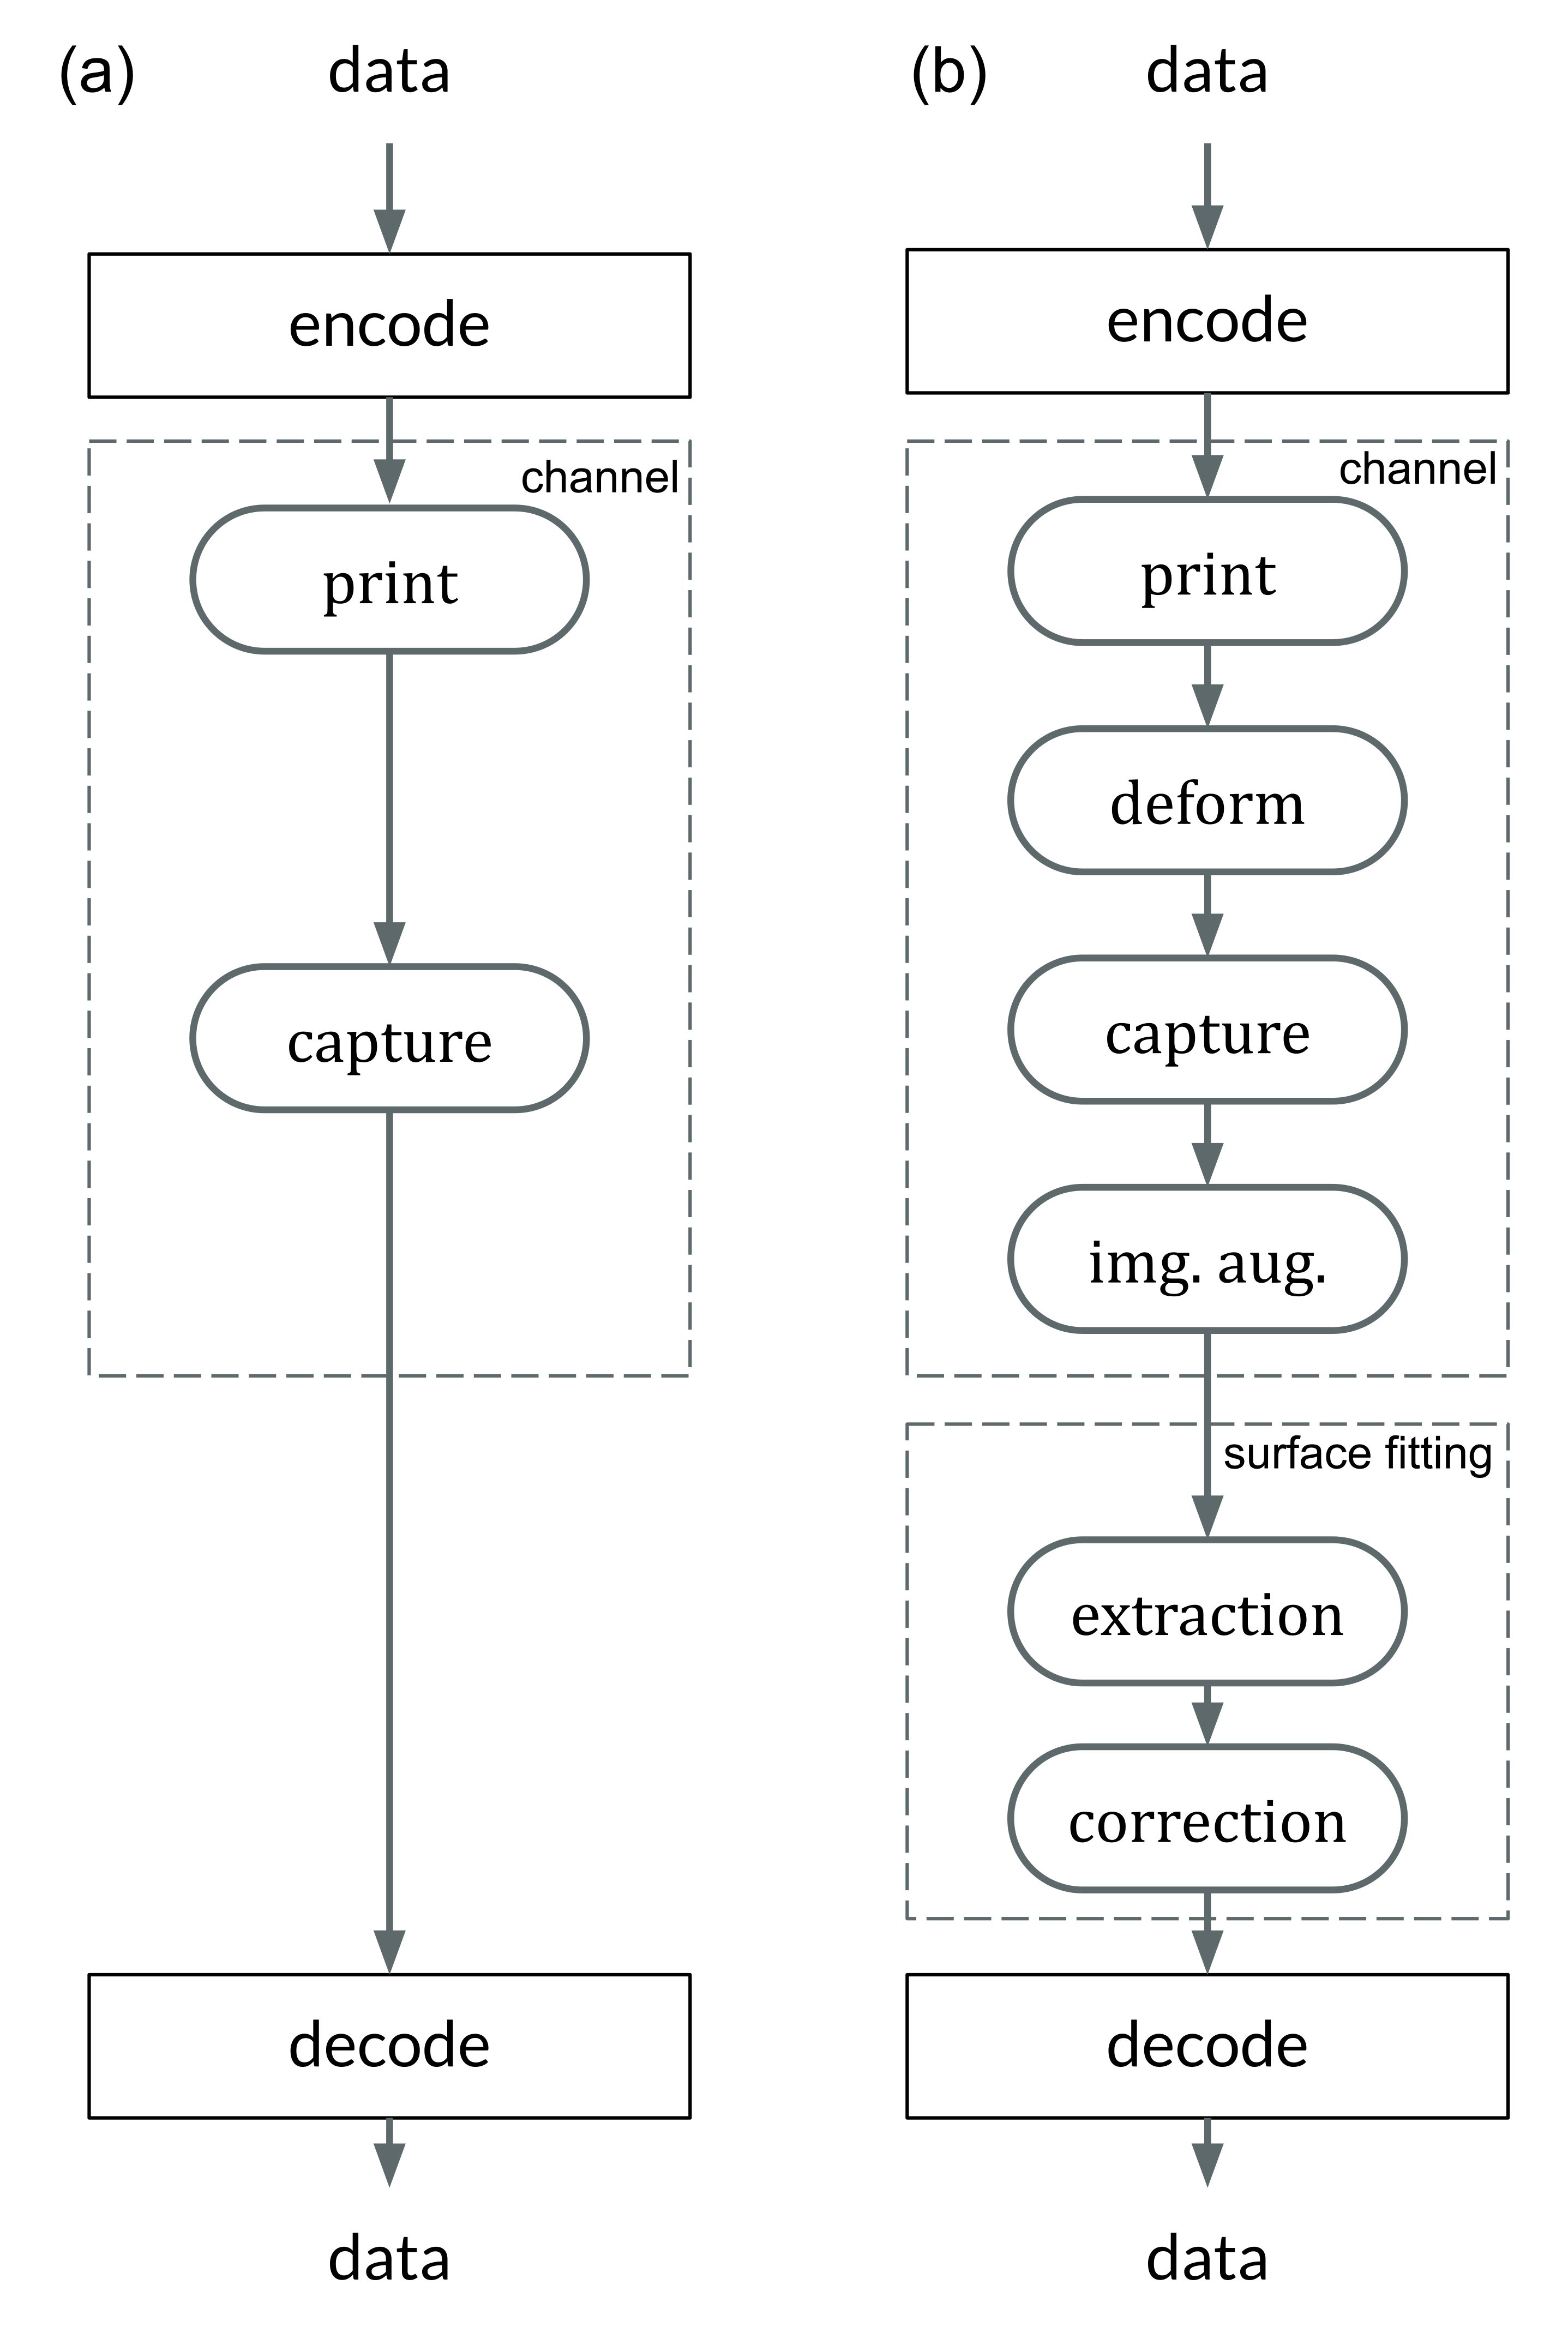 (a) Block diagram for an ideal encoding-decoding process of a QR Code. (b) A modified diagram with the addition of a deformation due to a noncoplanar surface topography and a surface fitting stage that contains a correction steps where image deformation is reverted to improve readout. In our experiments, also, an image augmentation step was added to be used in the proposed experiments for this work.